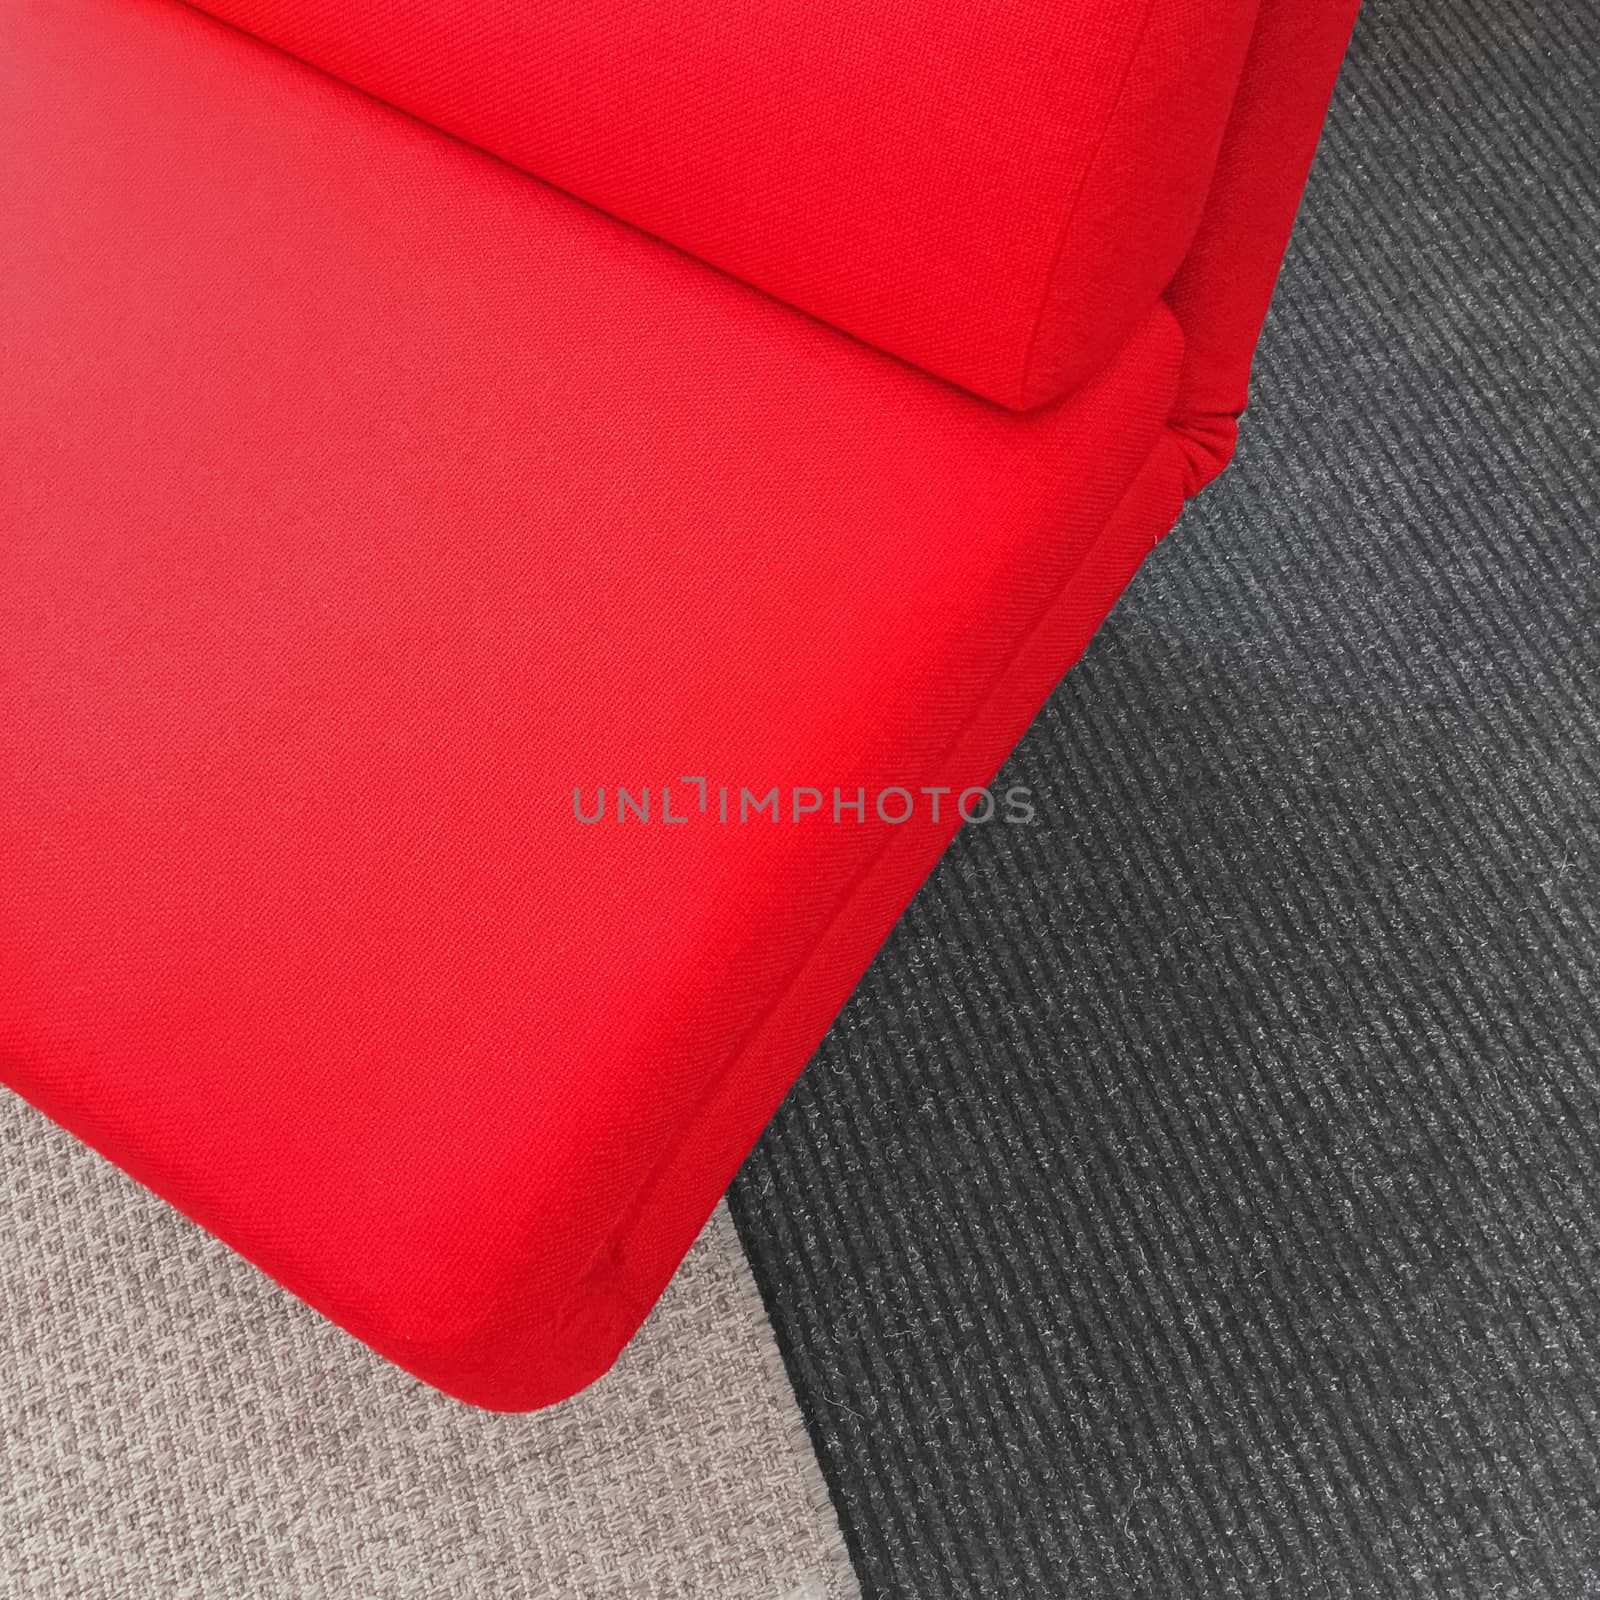 Vibrant soft red chair on gray carpet. Contemporary style furniture.